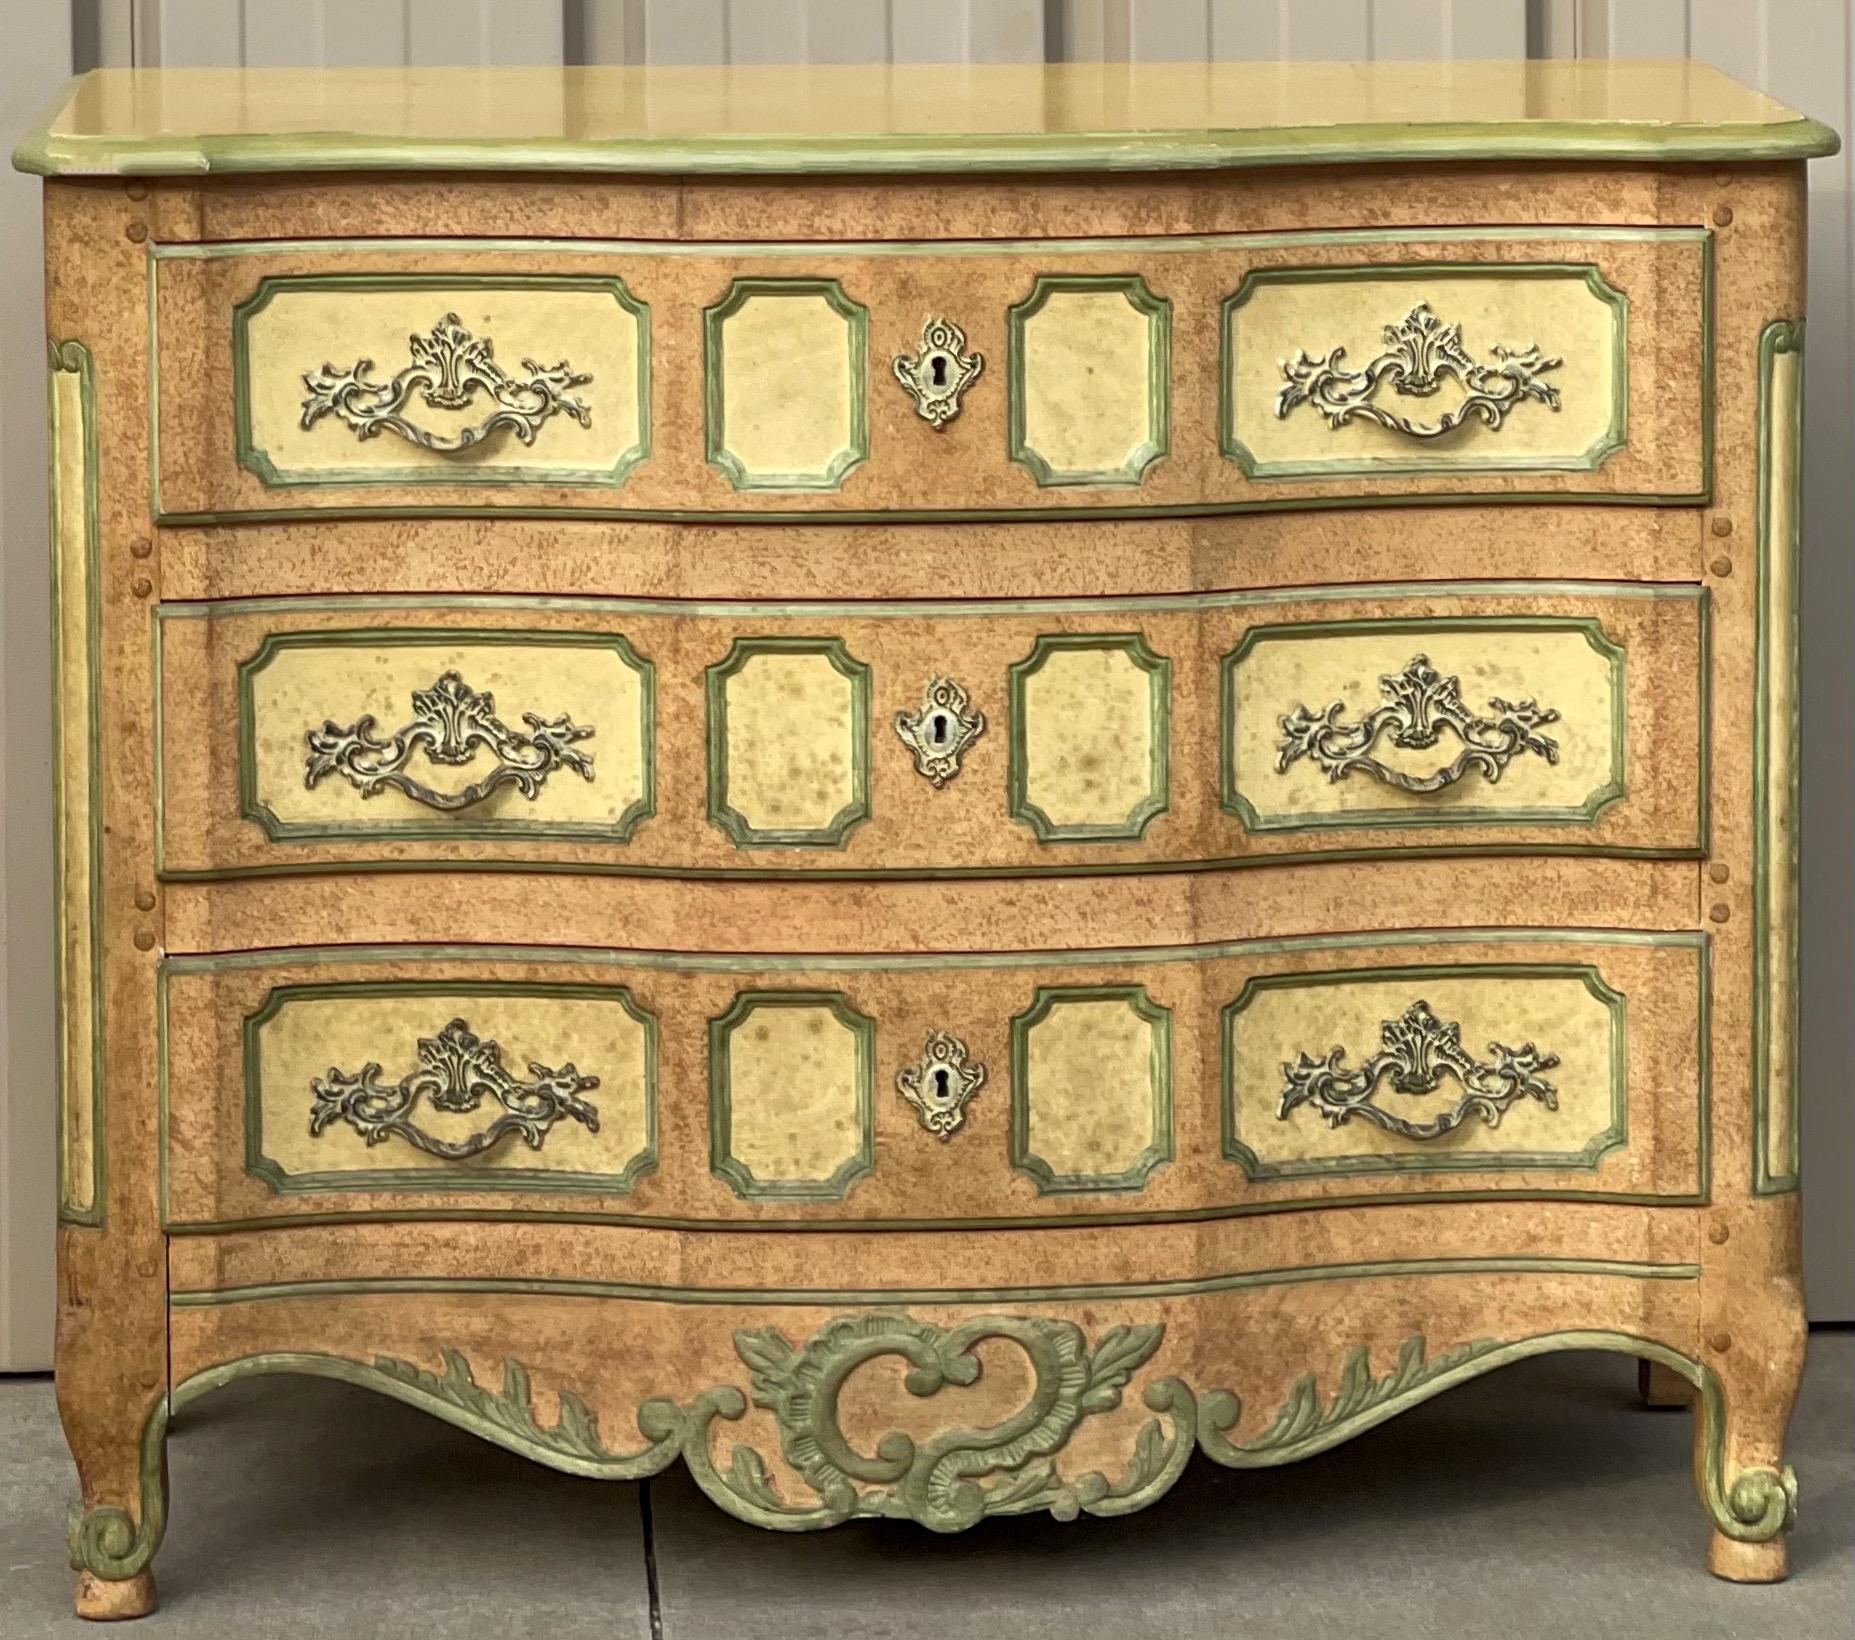 This is a custom painted commode by Baker Furniture Company. It is marked and in very good condition. The piece is a heavily carved fruitwood, and the painted finish is a vintage one.